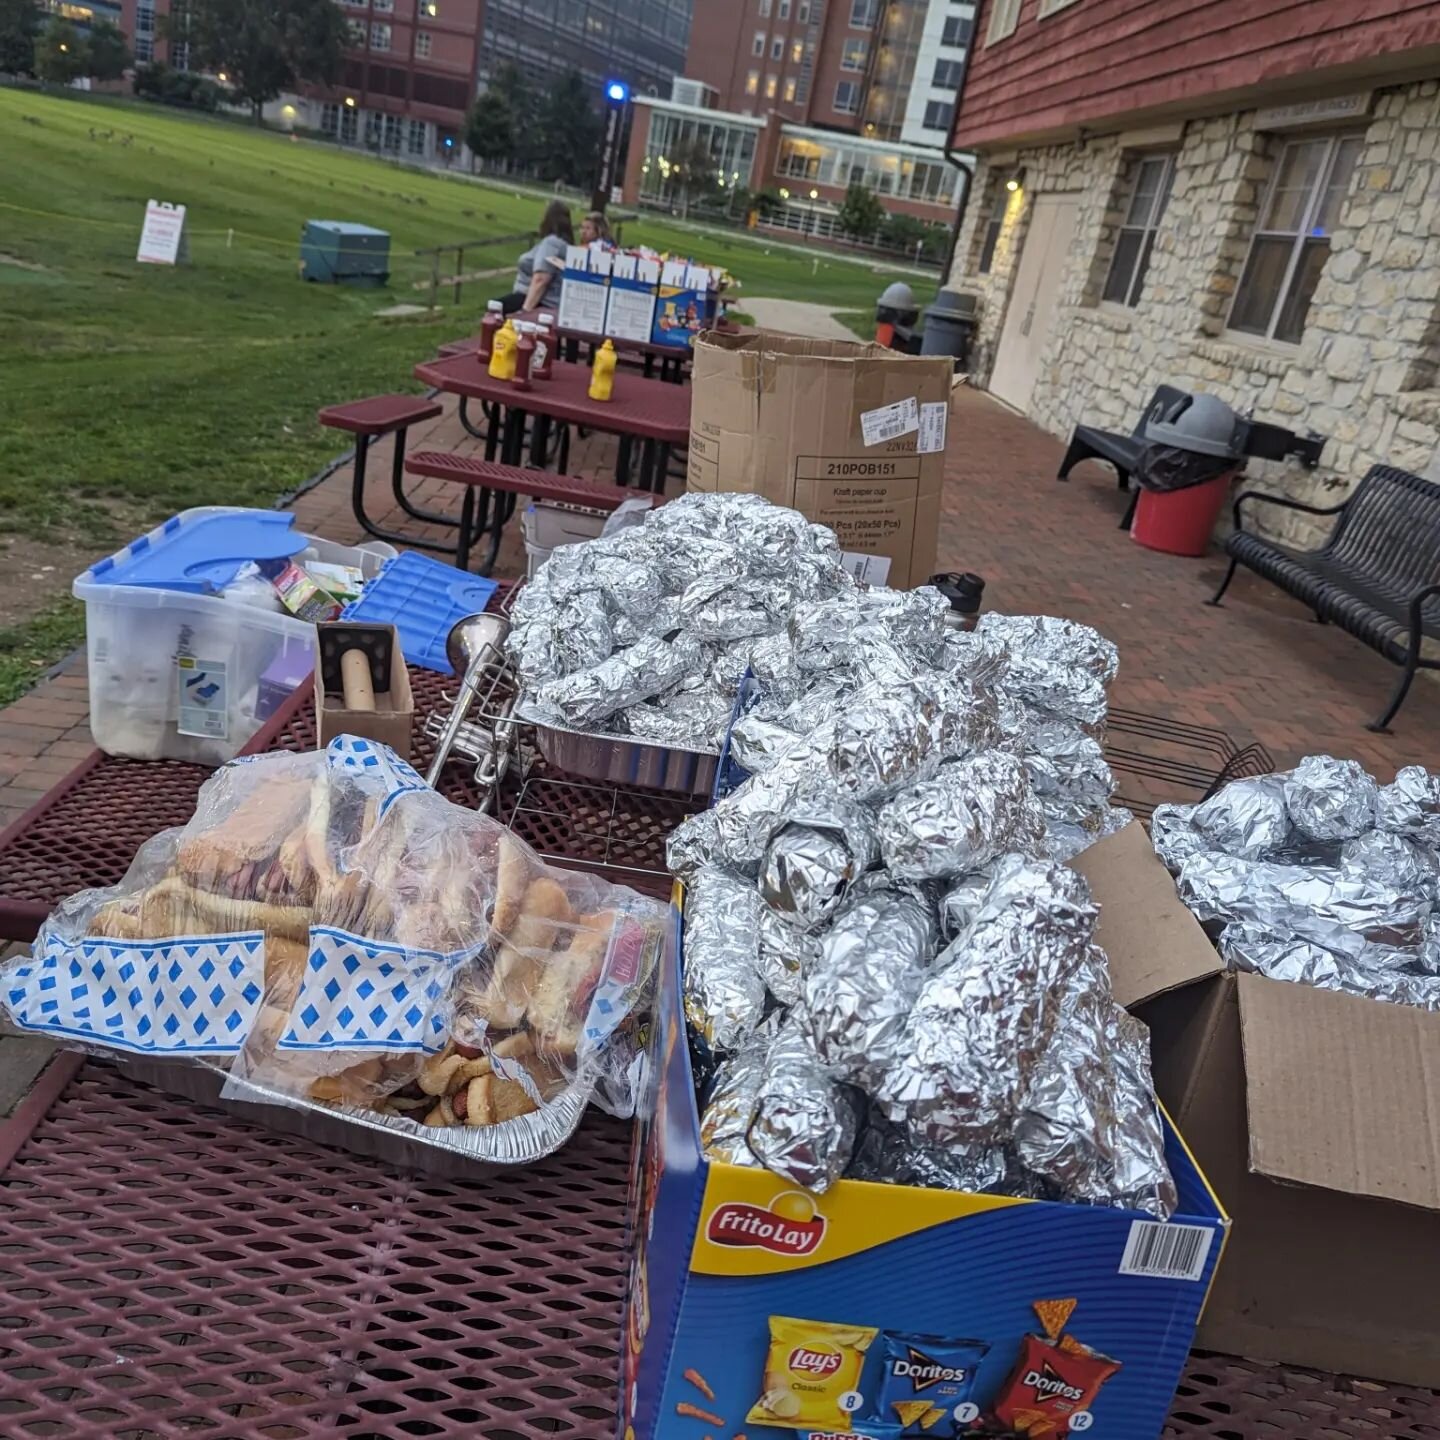 Last night our brothers cooked up some hot dogs for our final summer session!
Good luck to everyone as you look towards tryouts this weekend!